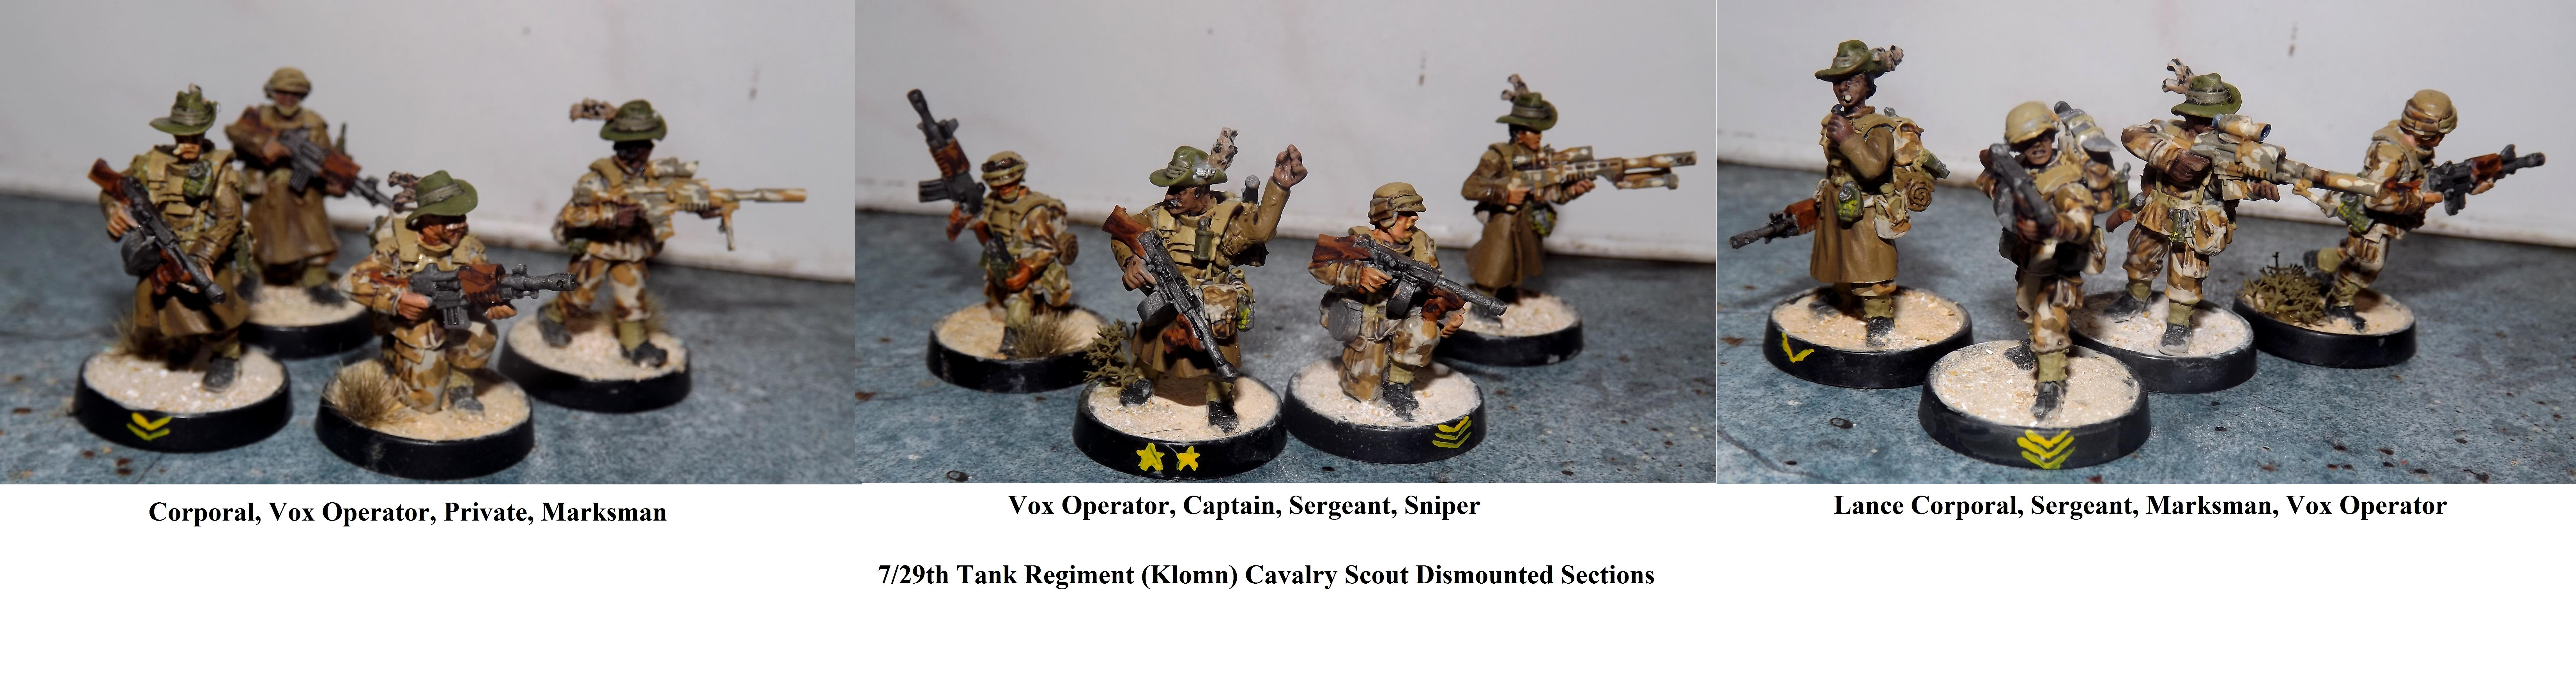 Anvil Industry, Cavalry, Desert, Dismounted, Dismounts, Female Guardsmen, Guardsmen, Imperial Guard, Marksman, Maxmini, Nco, Officer, Recon, Scouts, Slouch Hat, Snipers, Tommy Gun, Victoria Miniatures